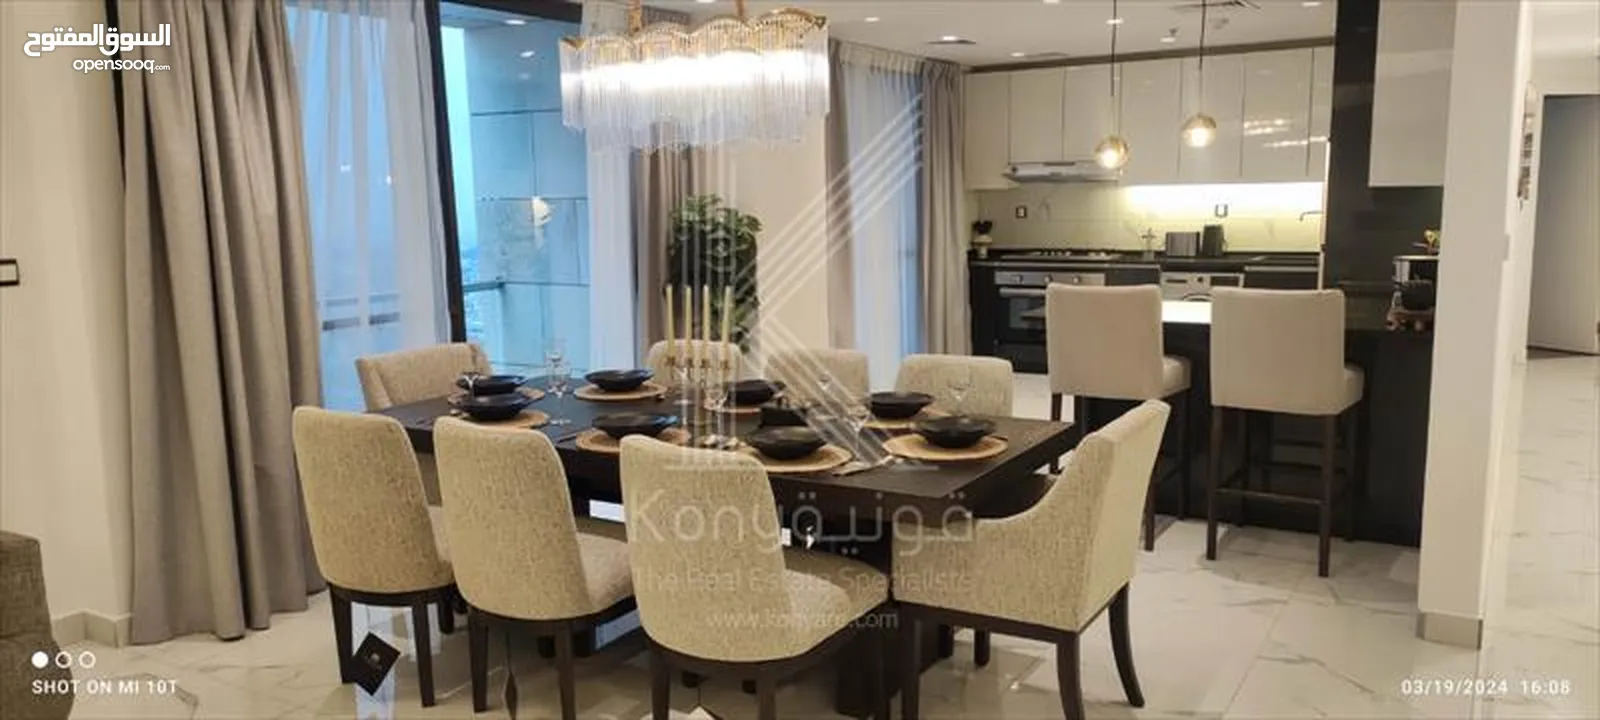 Furnished Apartment For Rent In Abdali